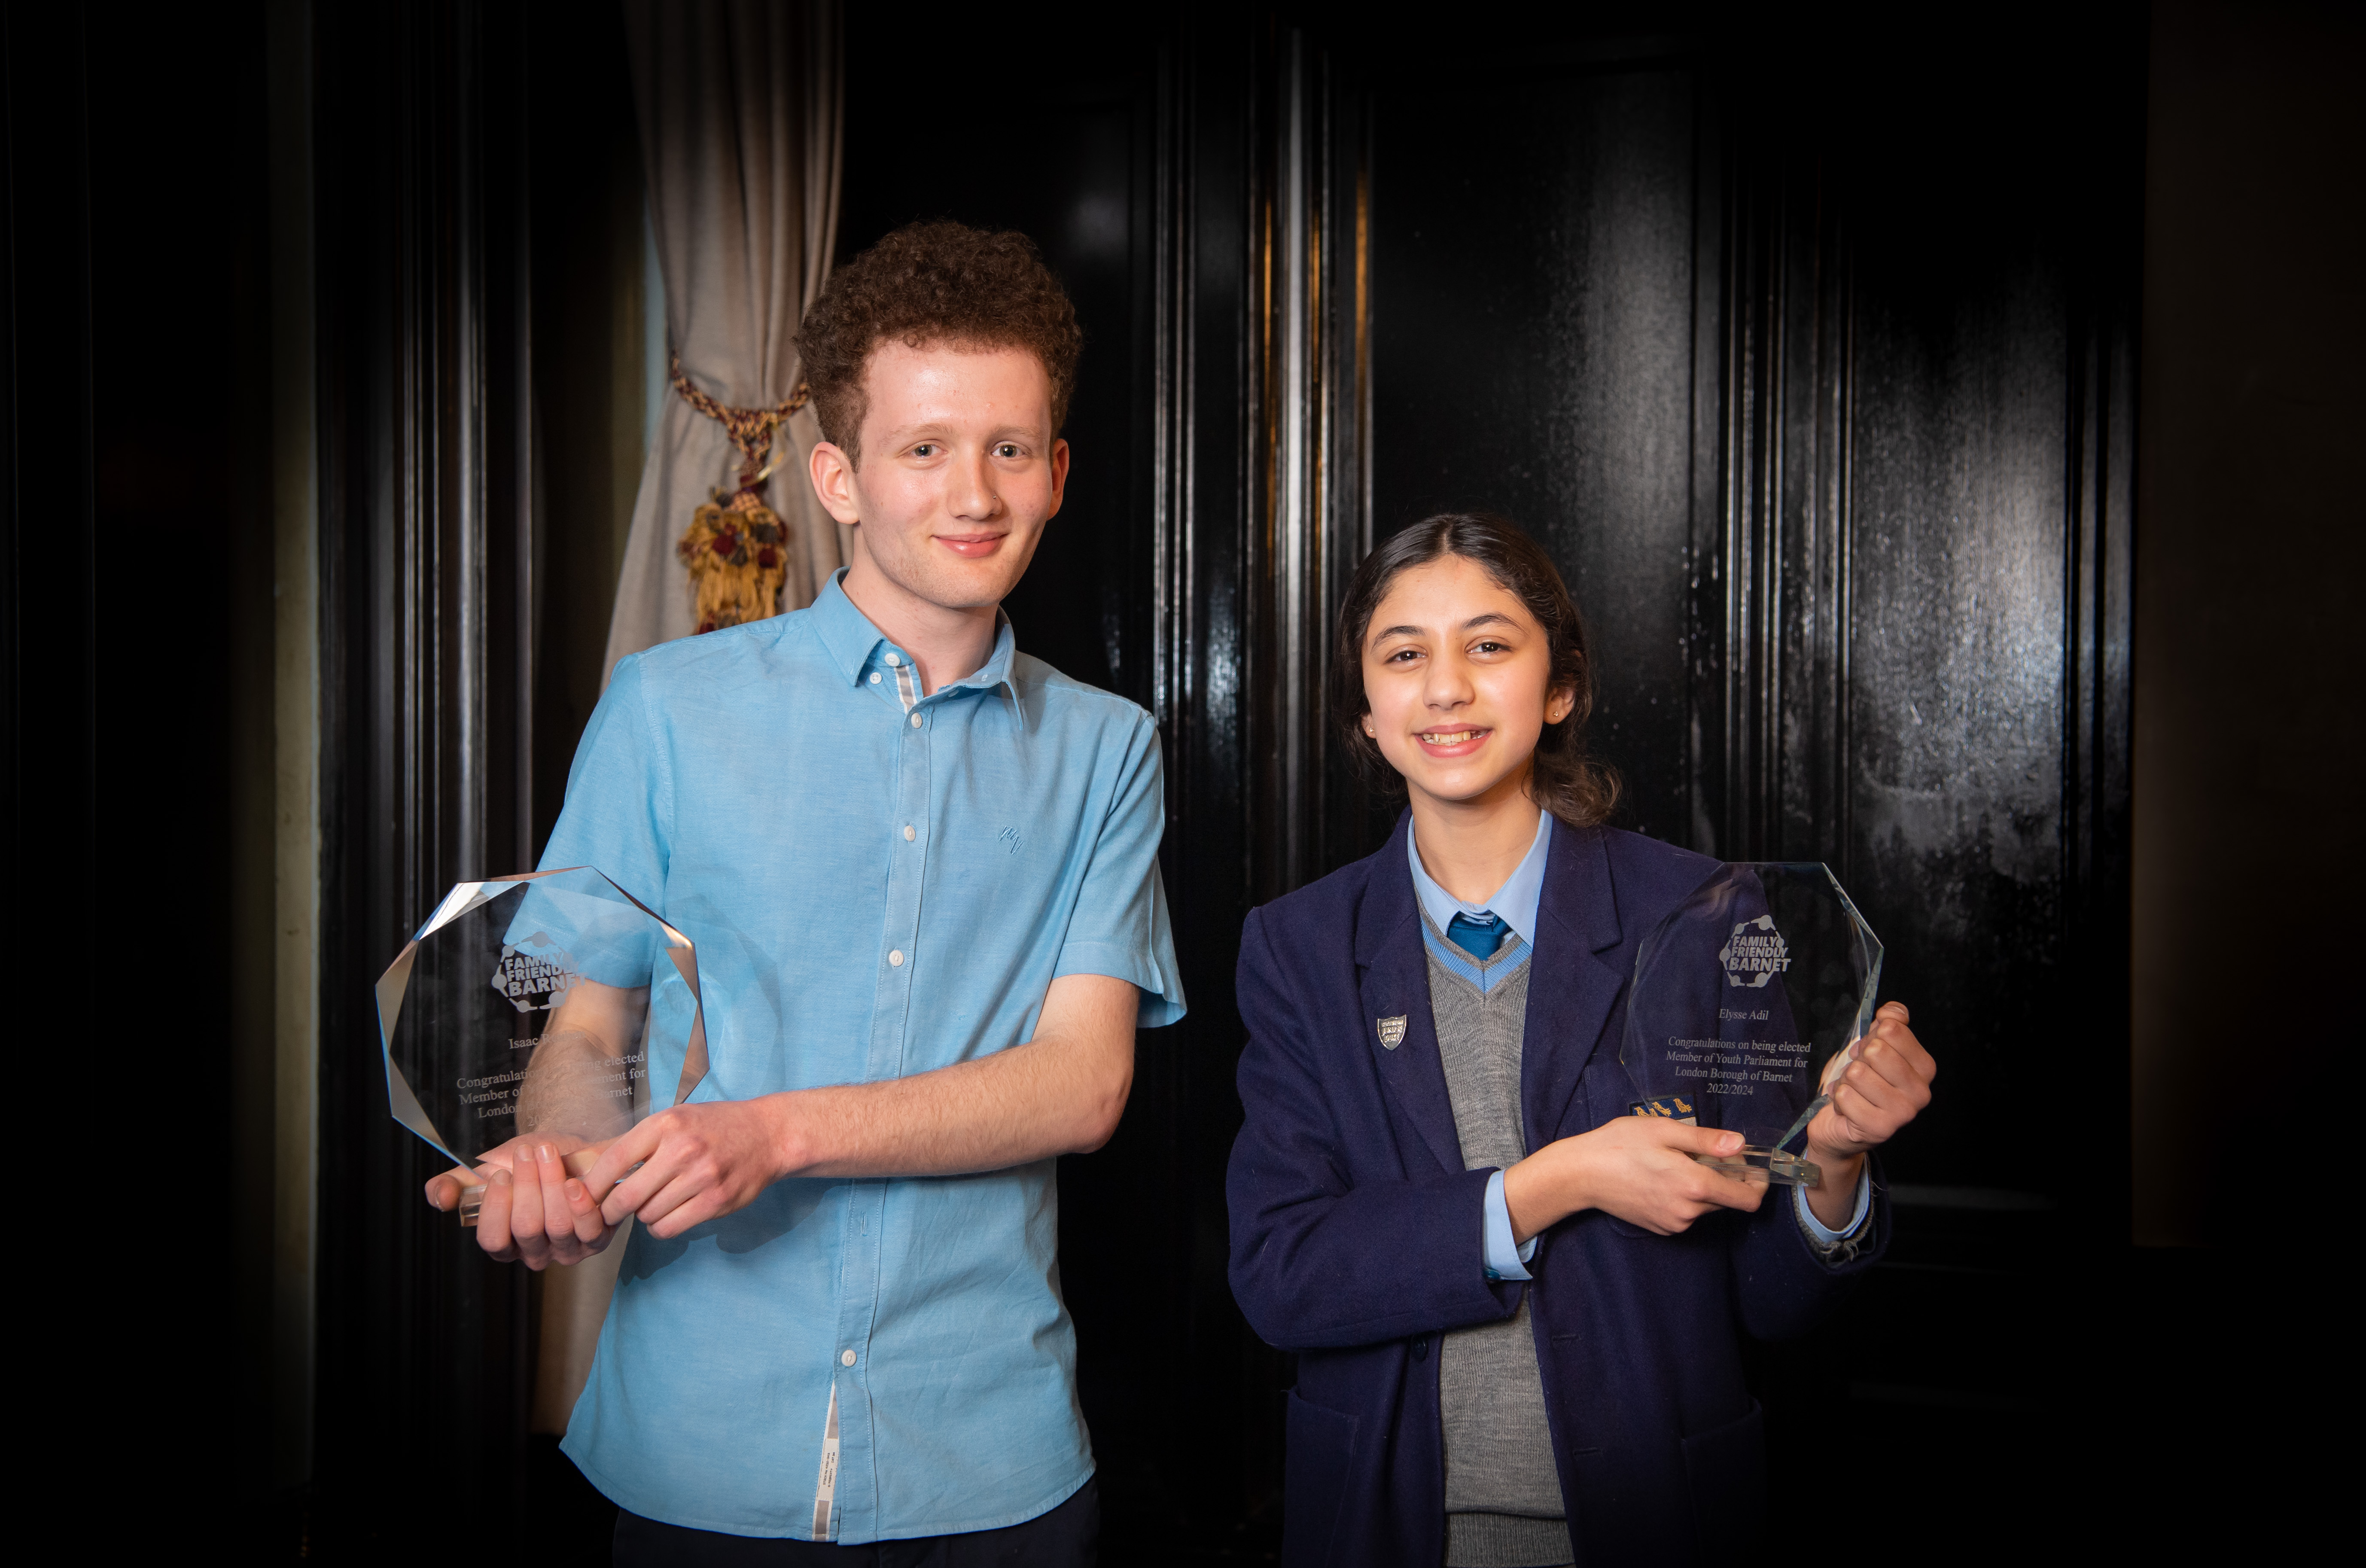 Barnet’s newest Members of Youth Parliament Isaac Reuben and Elysse Adil